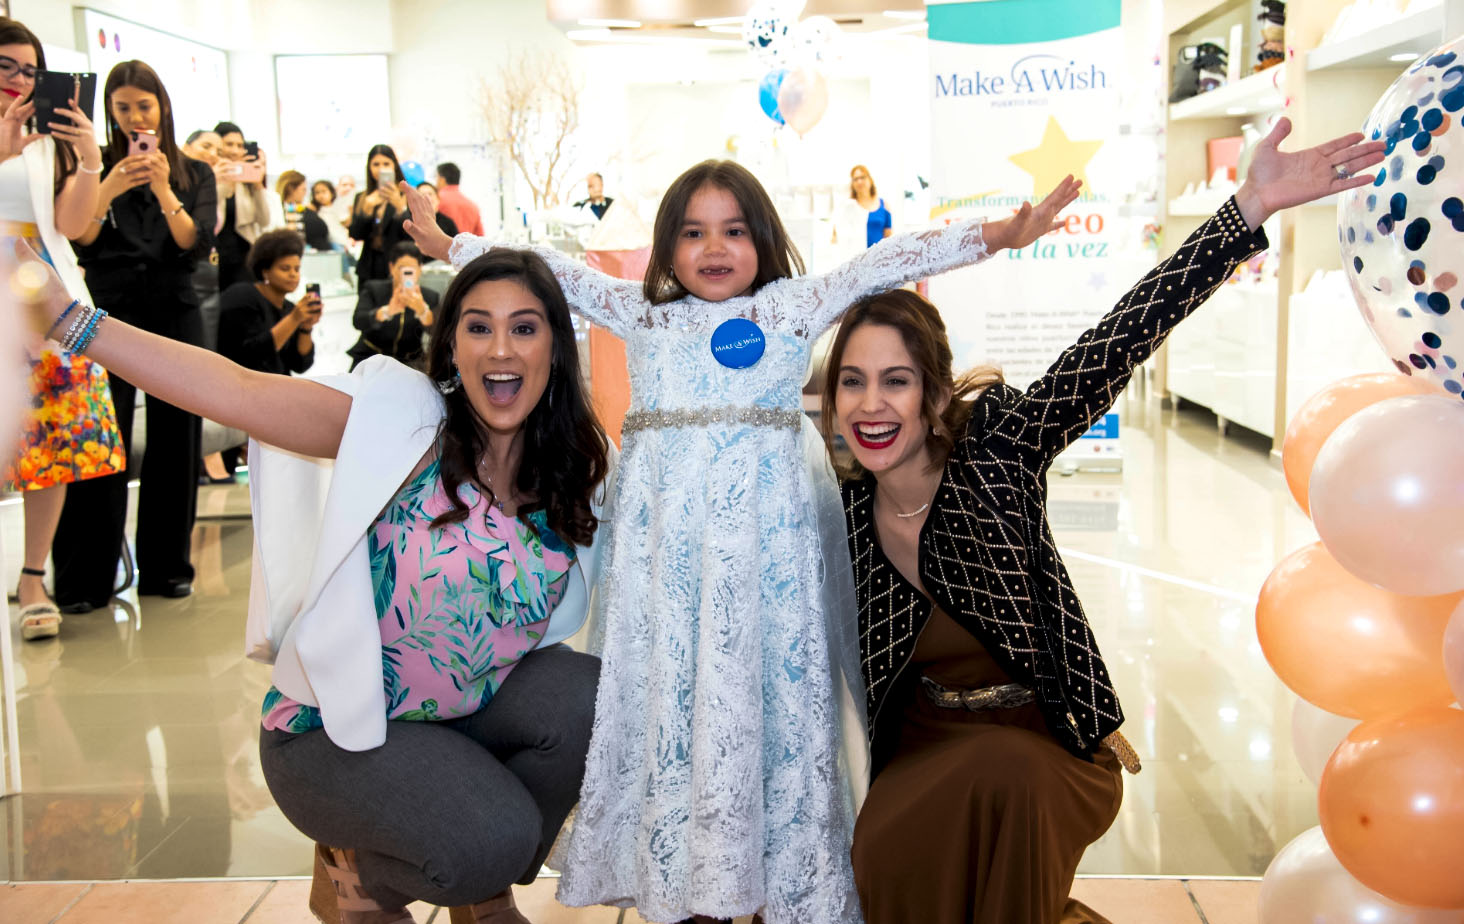 forever-crystal-make-a-wish1-reportemedico